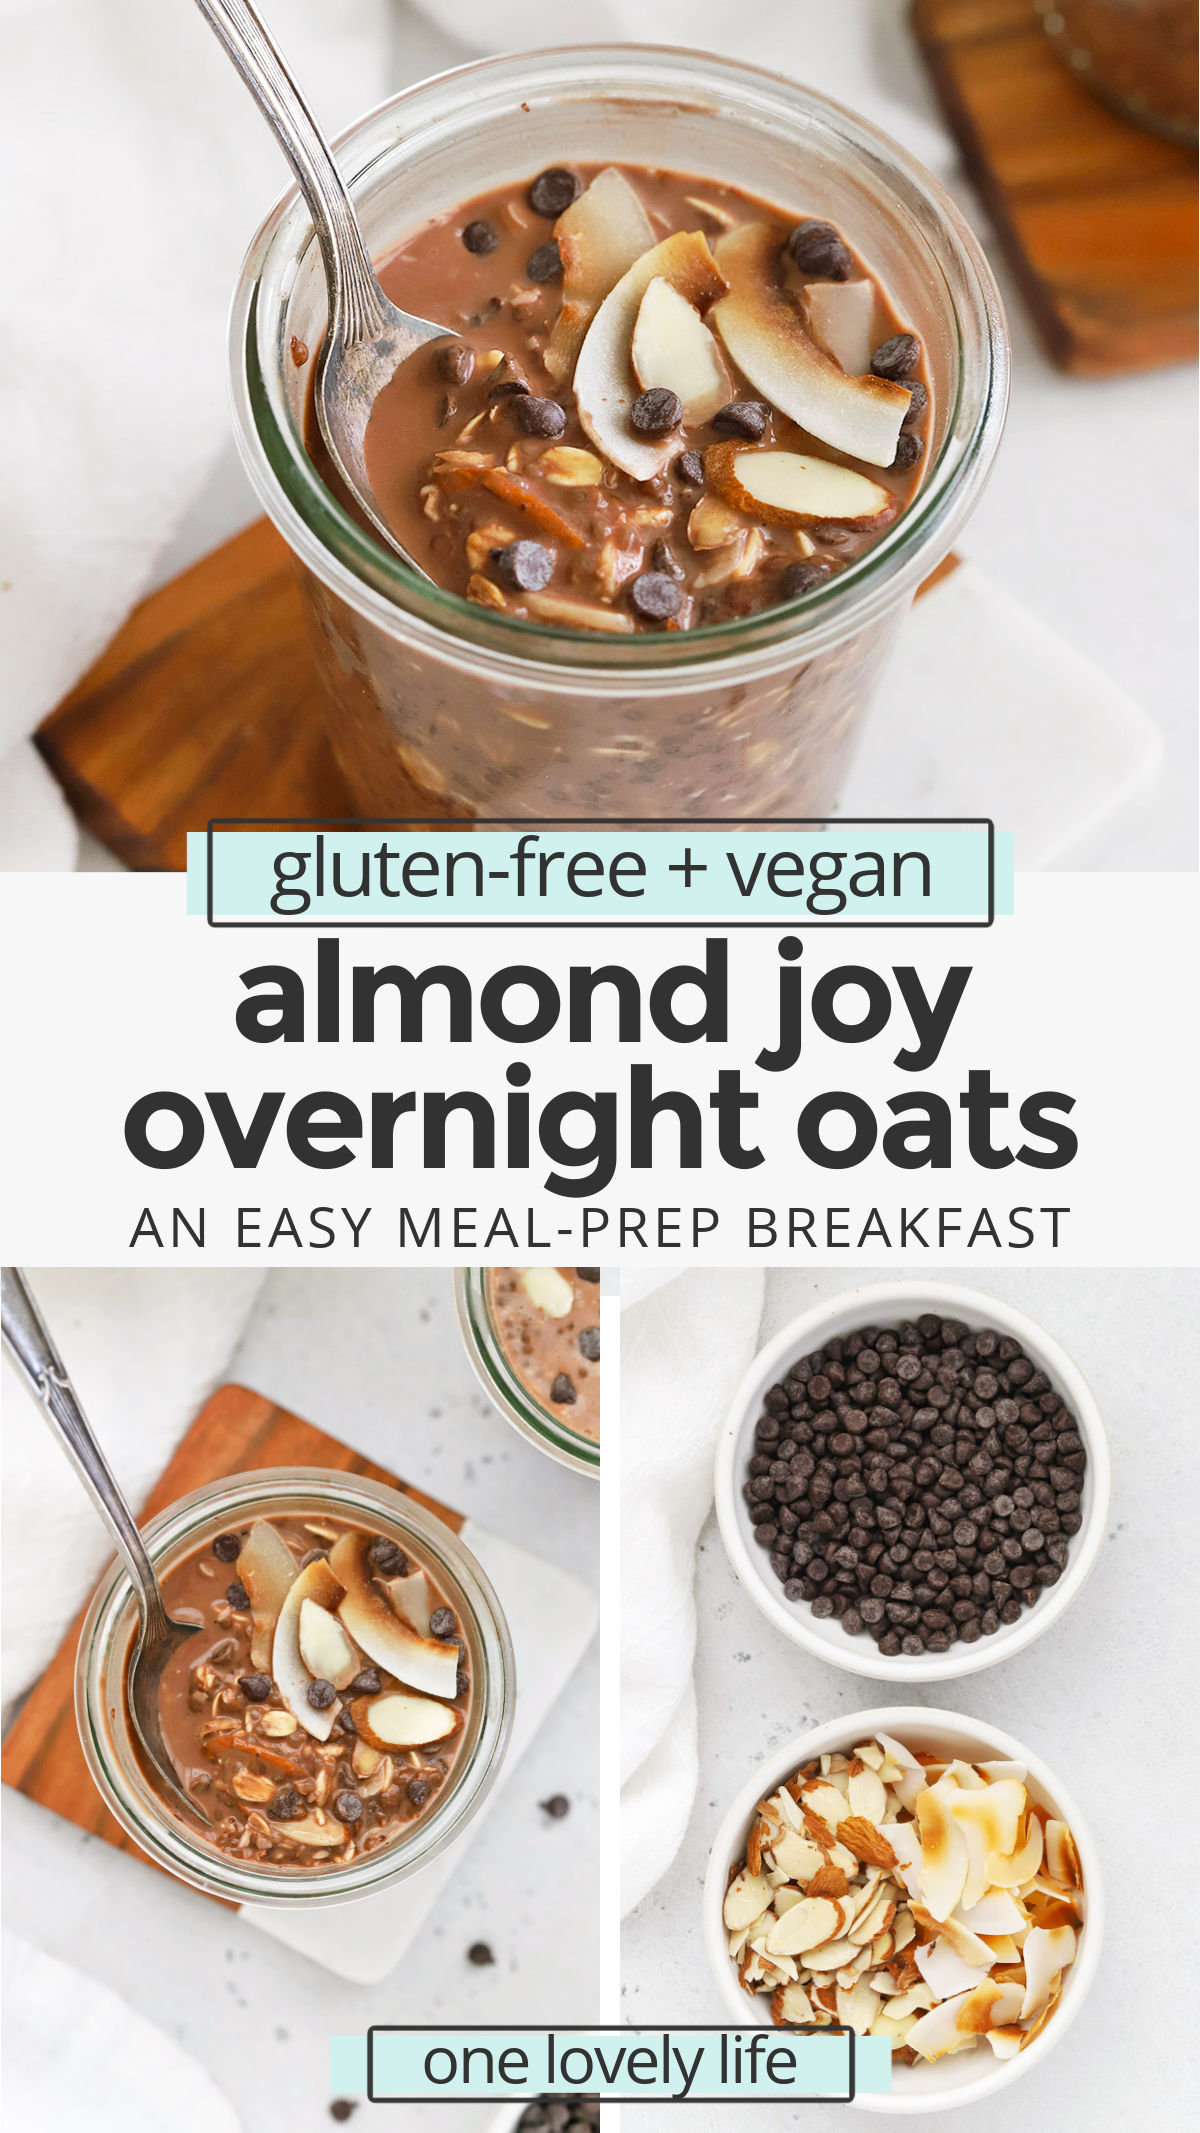 Almond Joy Overnight Oats - These creamy chocolate coconut overnight oats feel like such a treat to wake up to! (Vegan, Gluten-Free) // Healthy Breakfast // Vegan Breakfast // Gluten Free Breakfast // Chocolate Overnight Oats // Vegan Overnight Oats #almondjoy #overnightoats #healthybreakfast #vegan #glutenfree